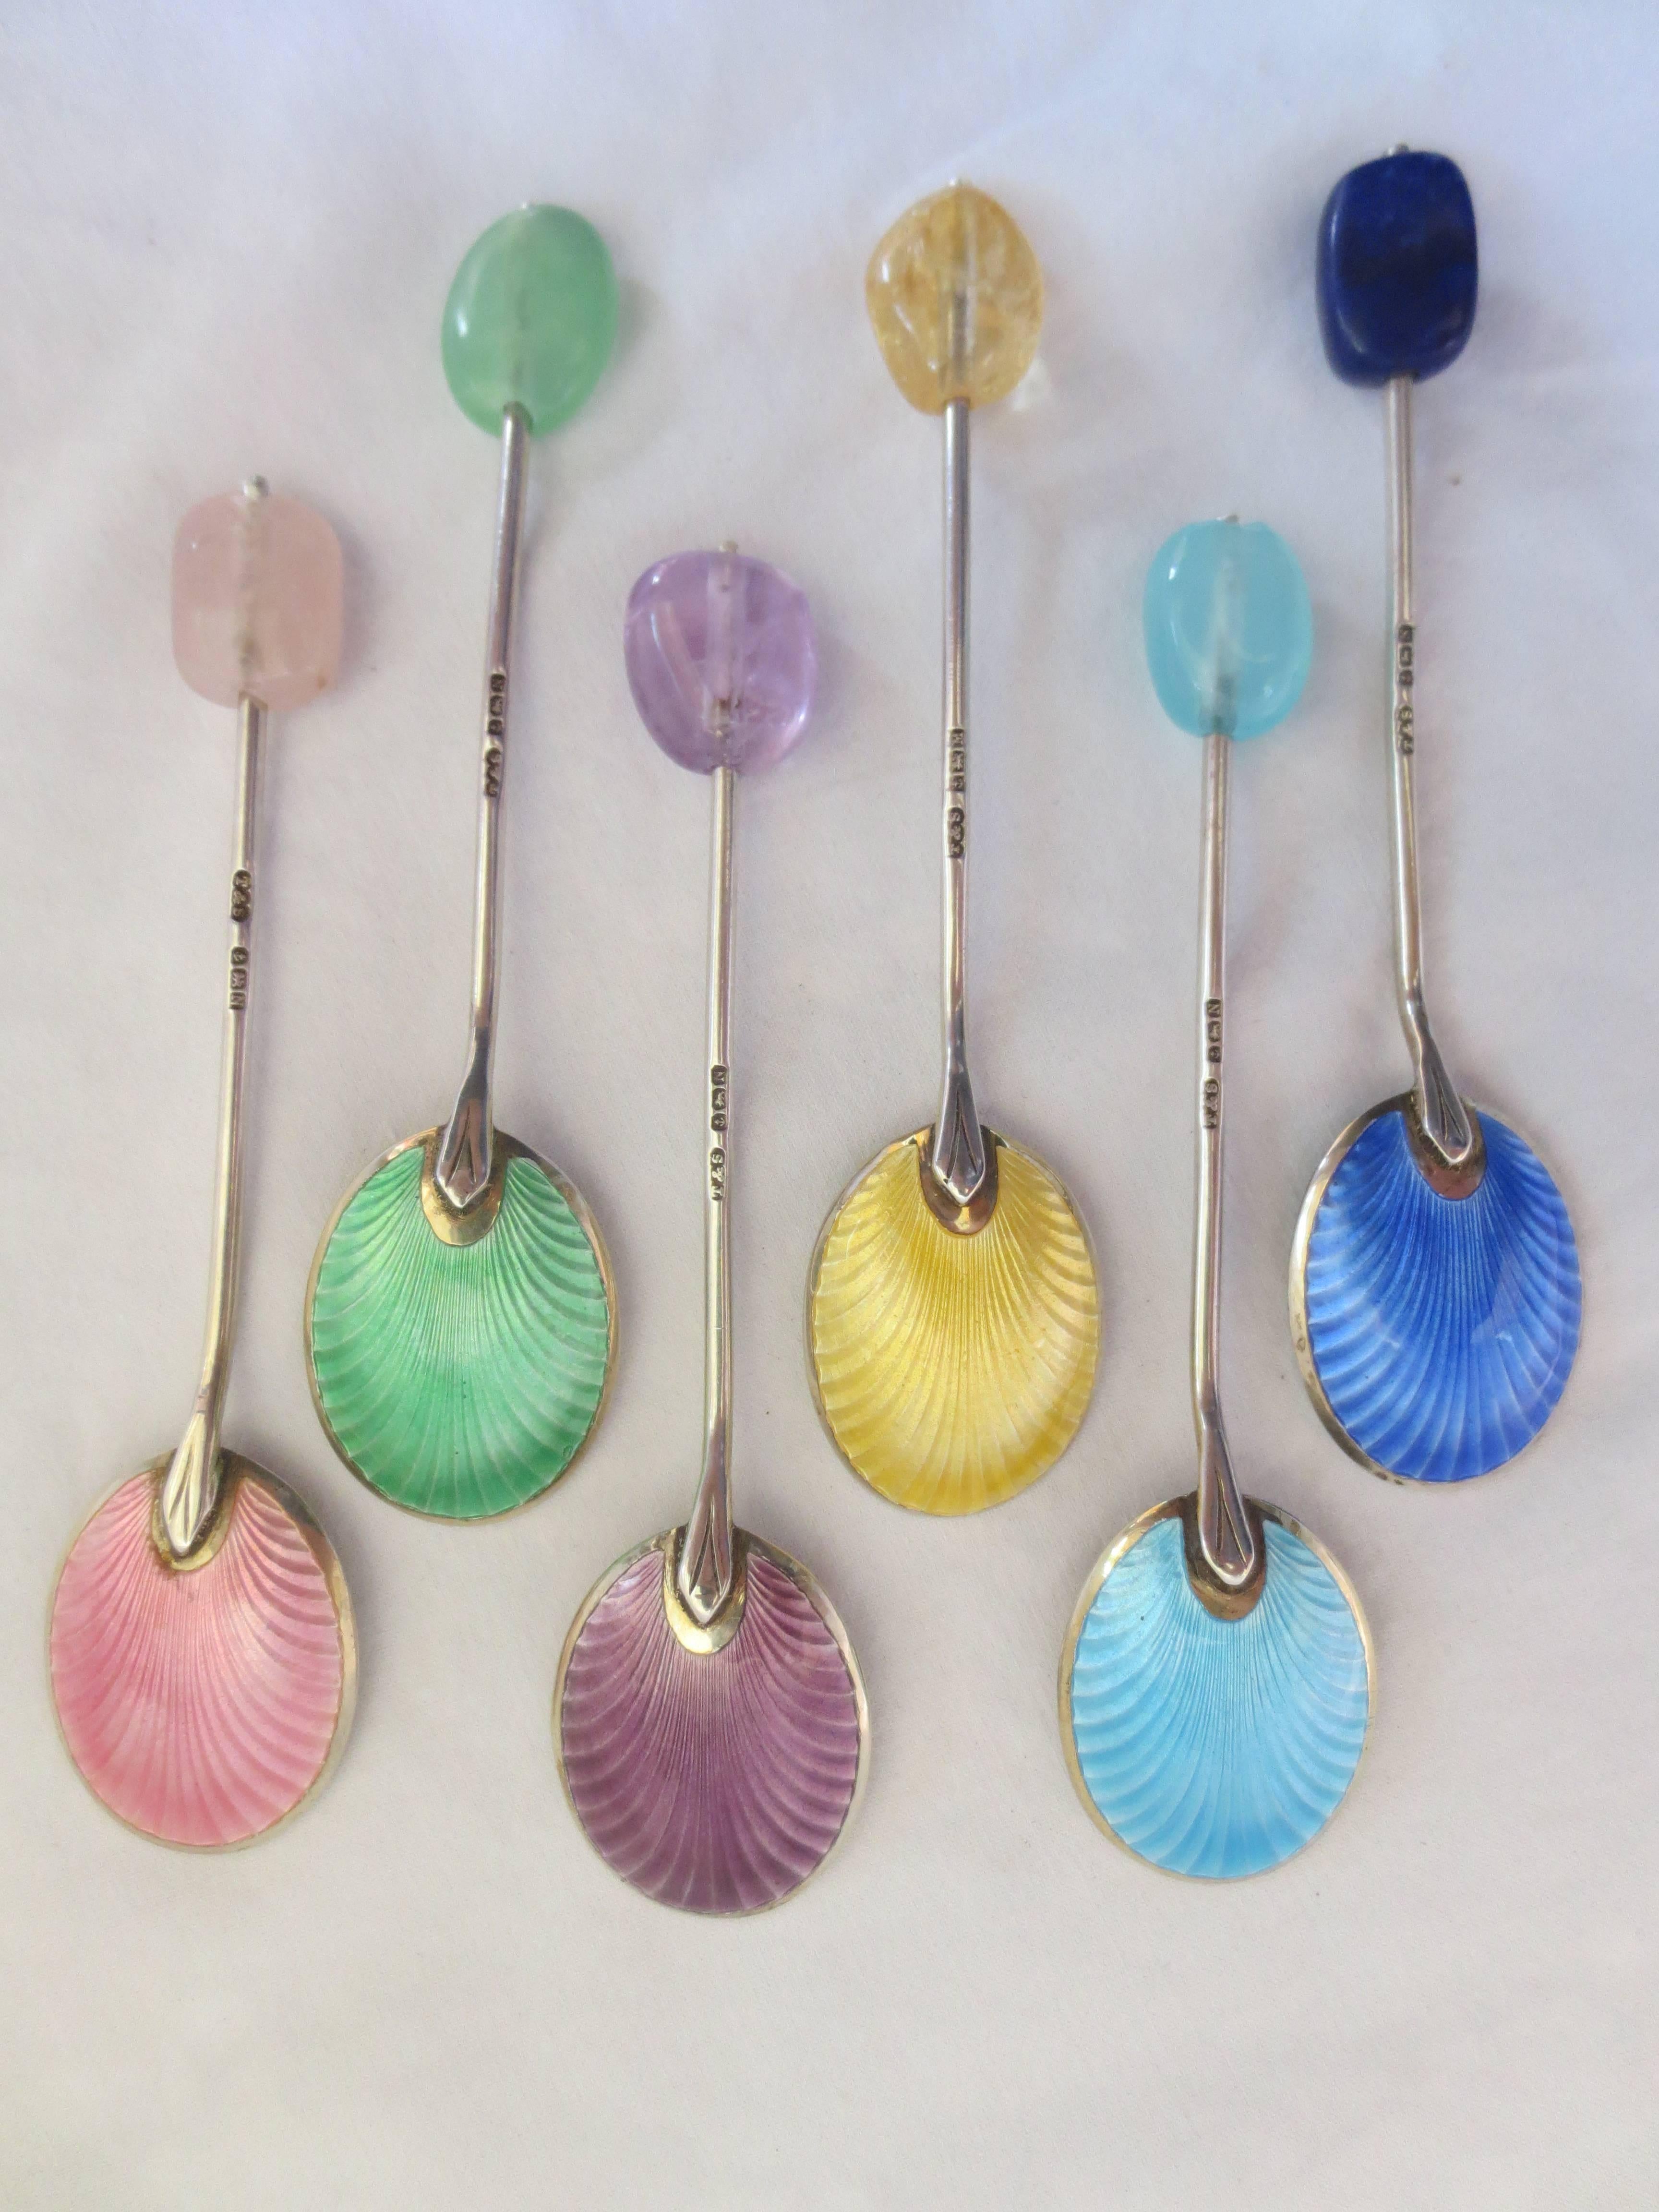 One-of-a-kind Enameled Silver Spoons Refurbished with Semi precious stone beads. 5